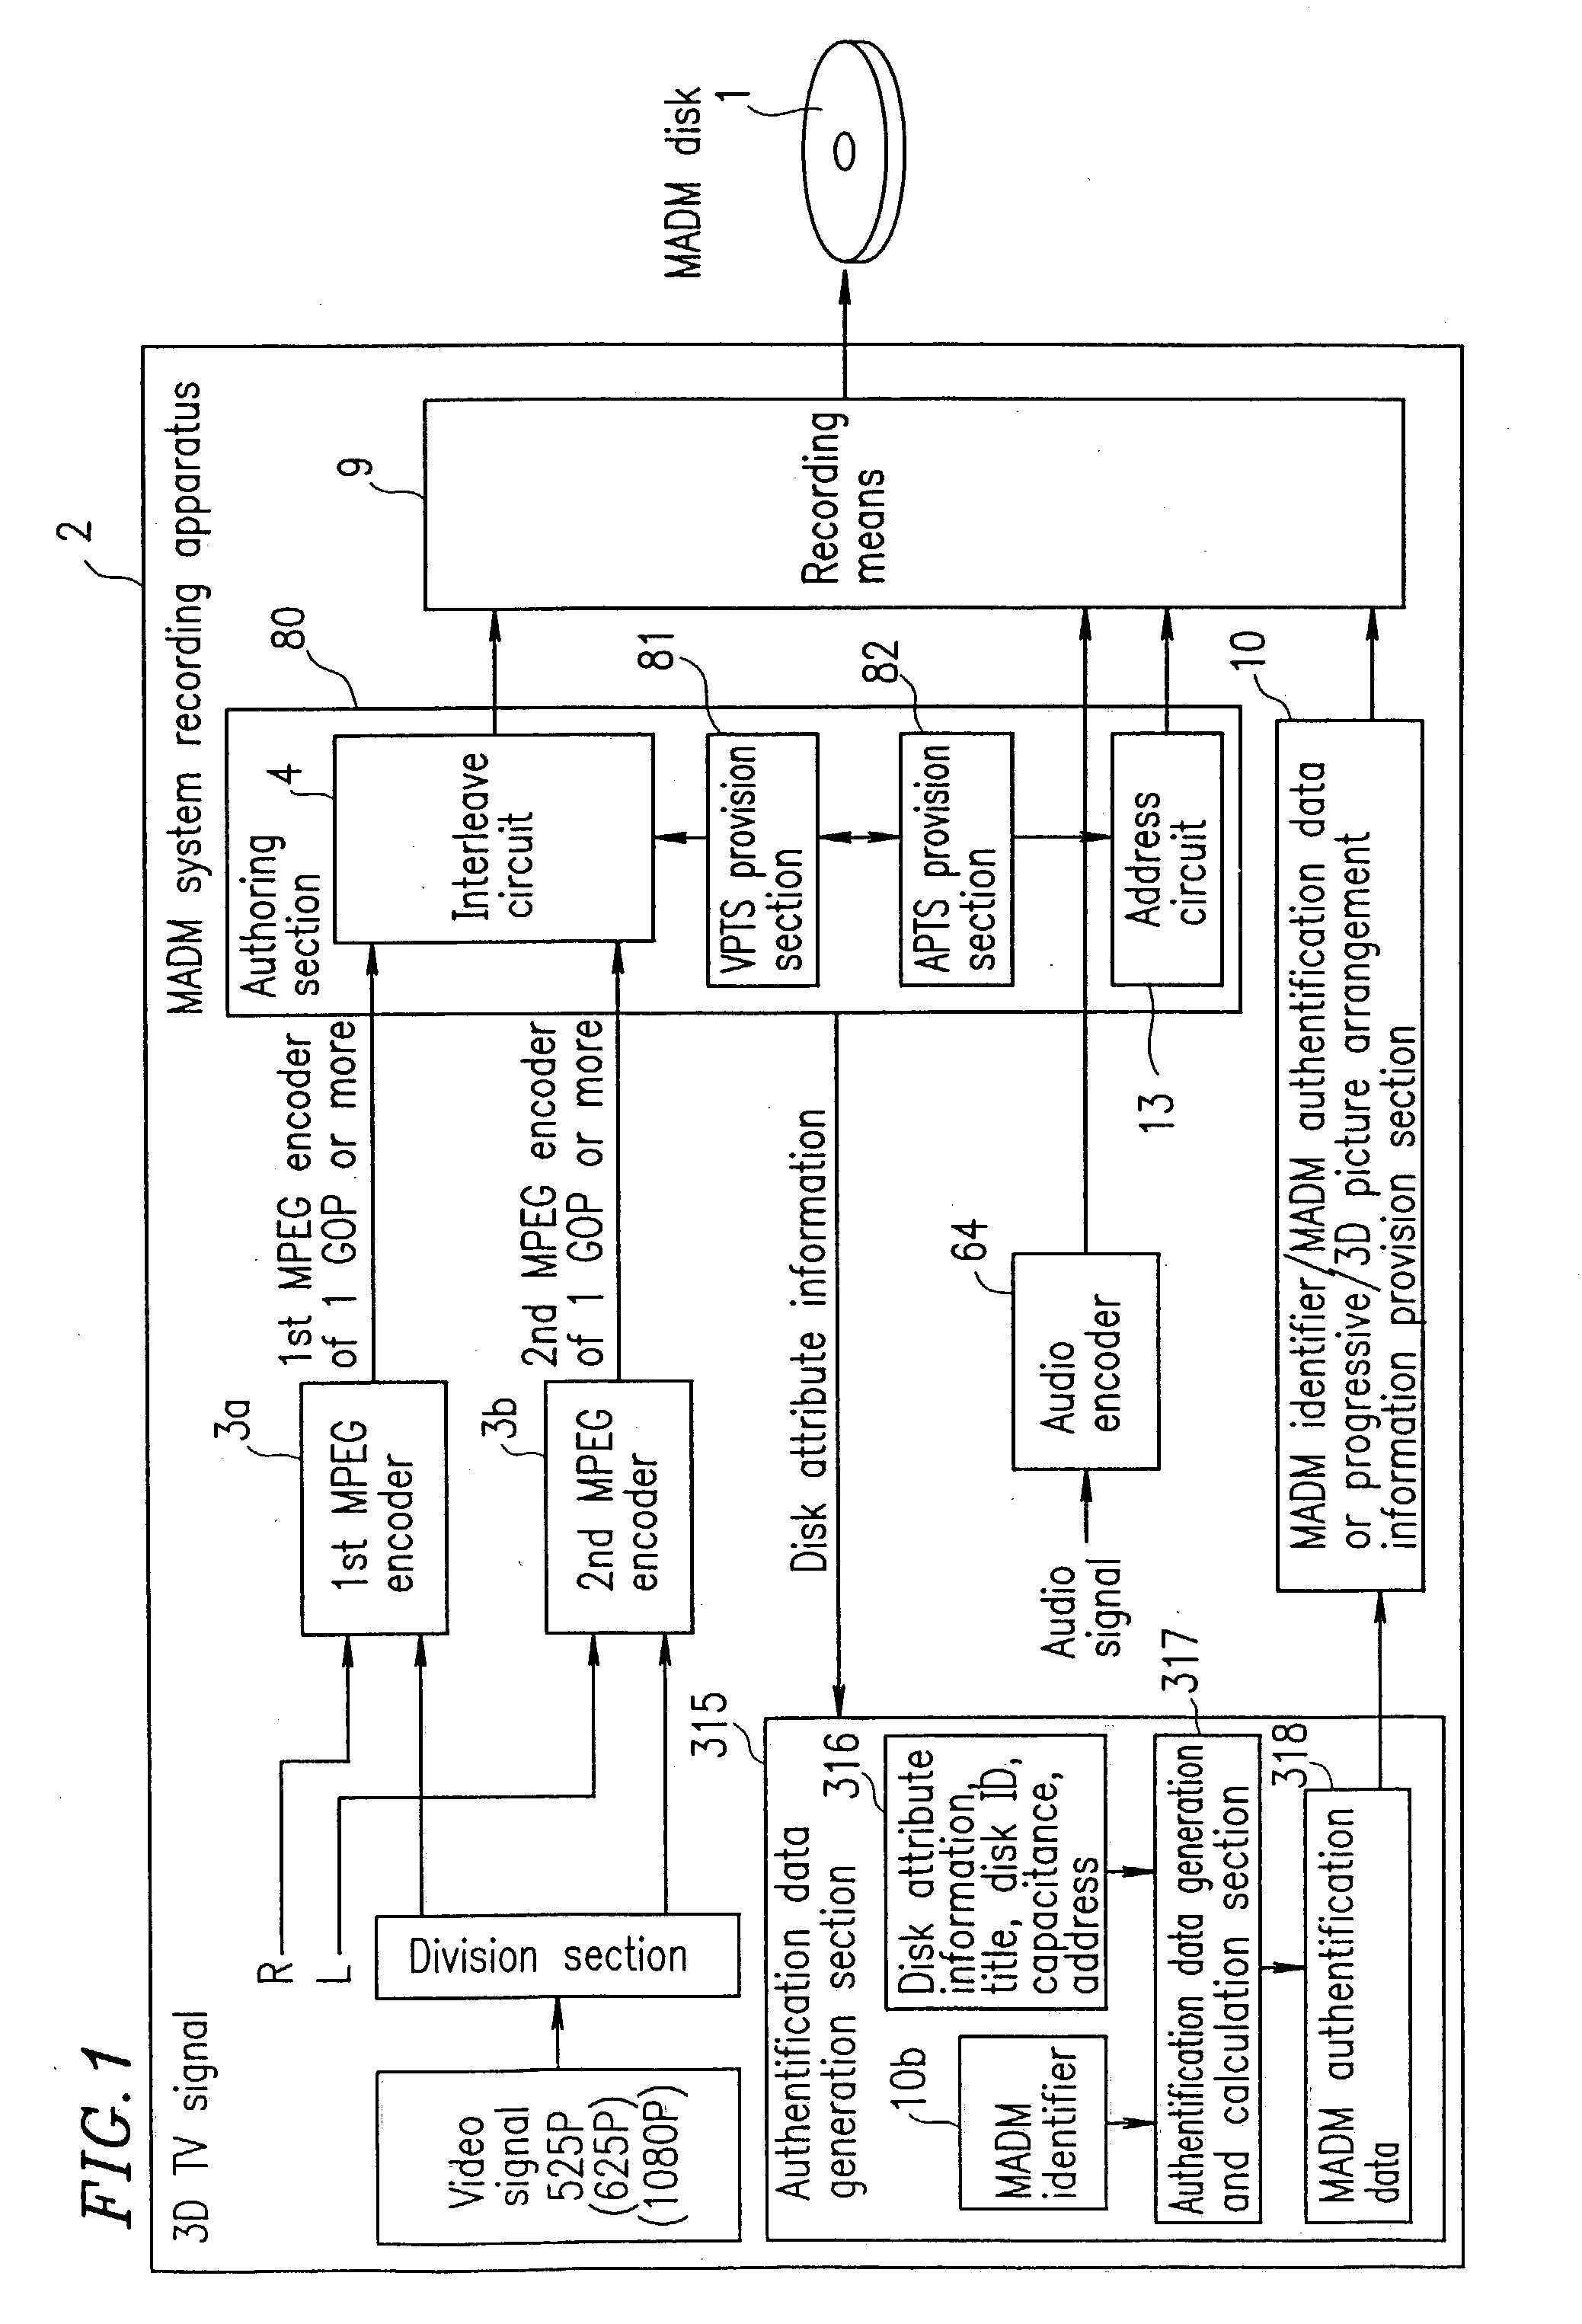 Optical disk for high resolution and three-dimensional video recording, optical disk reproduction apparatus, and optical disk recording apparatus